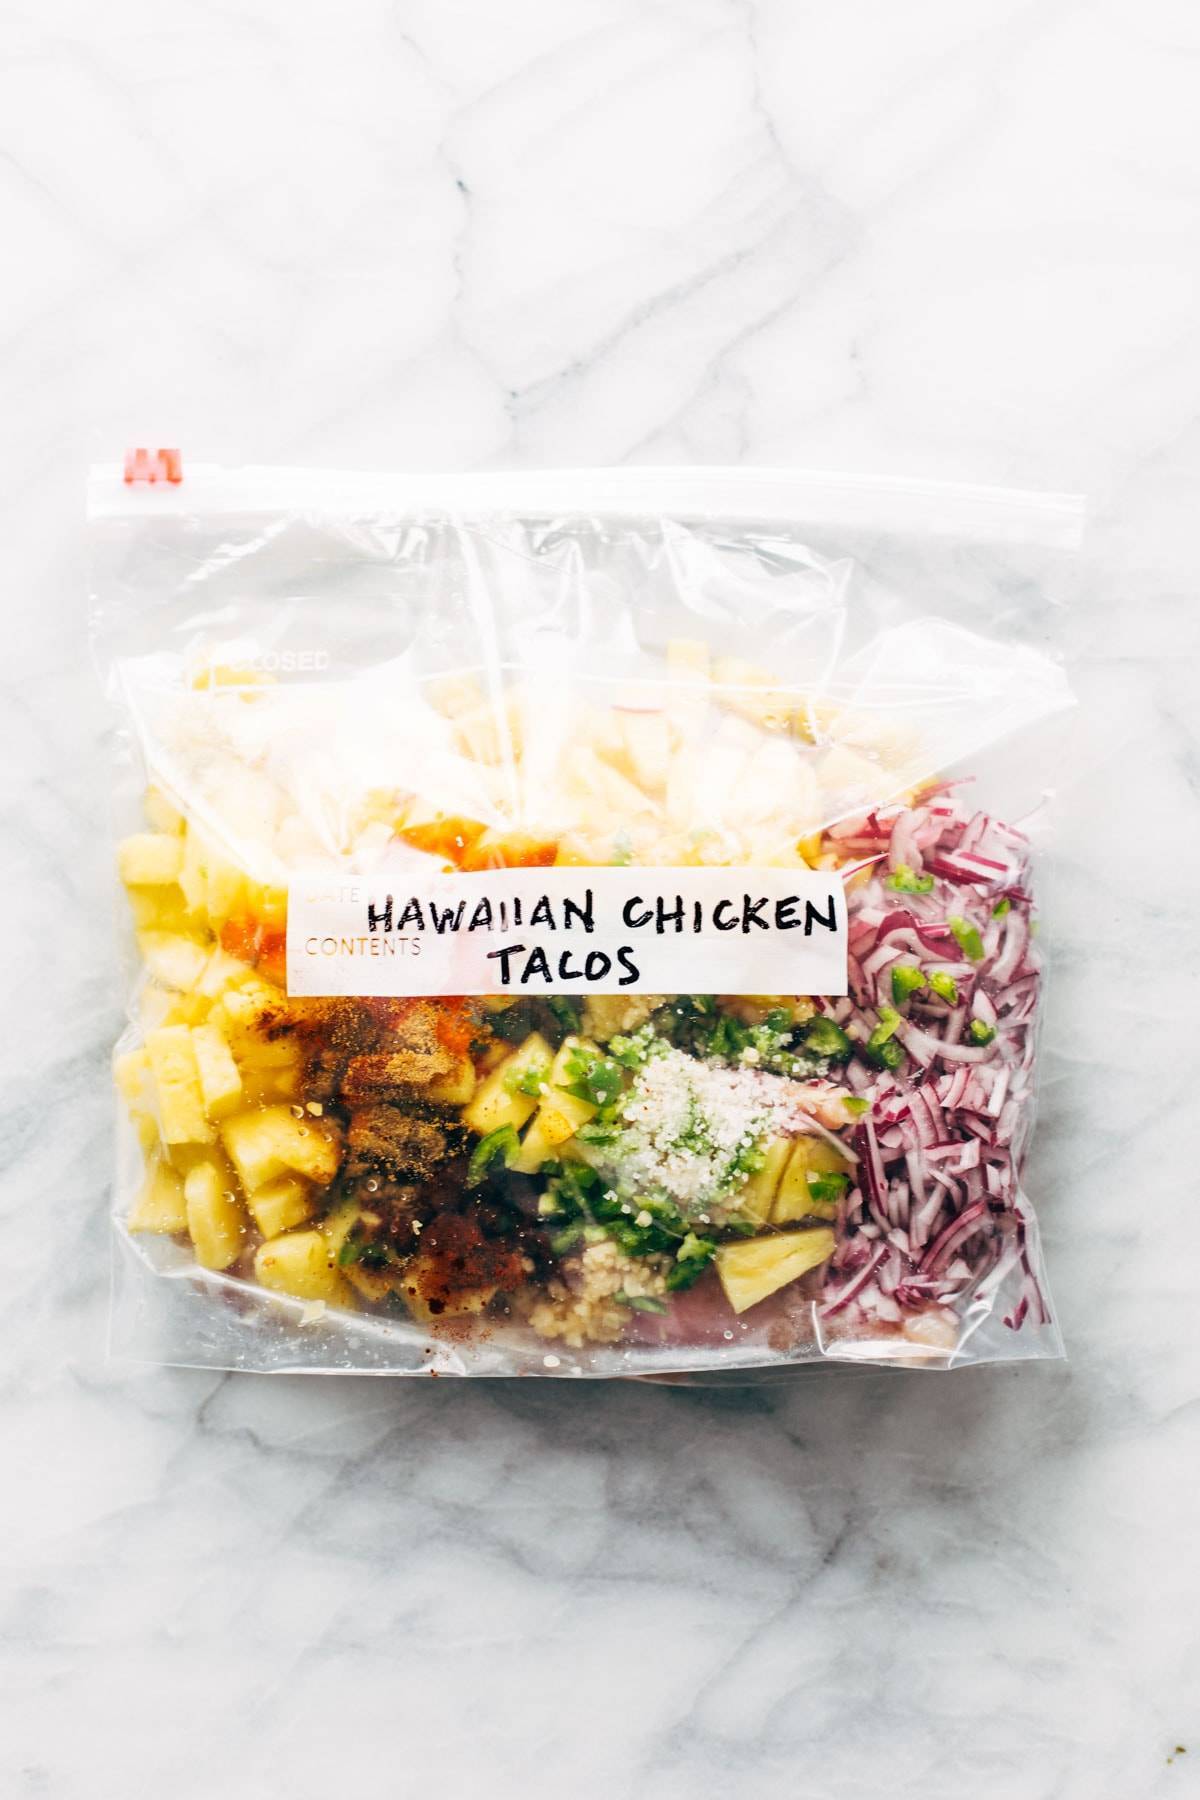 A clear bag with food and the label "Hawiian Chicken Tacos."